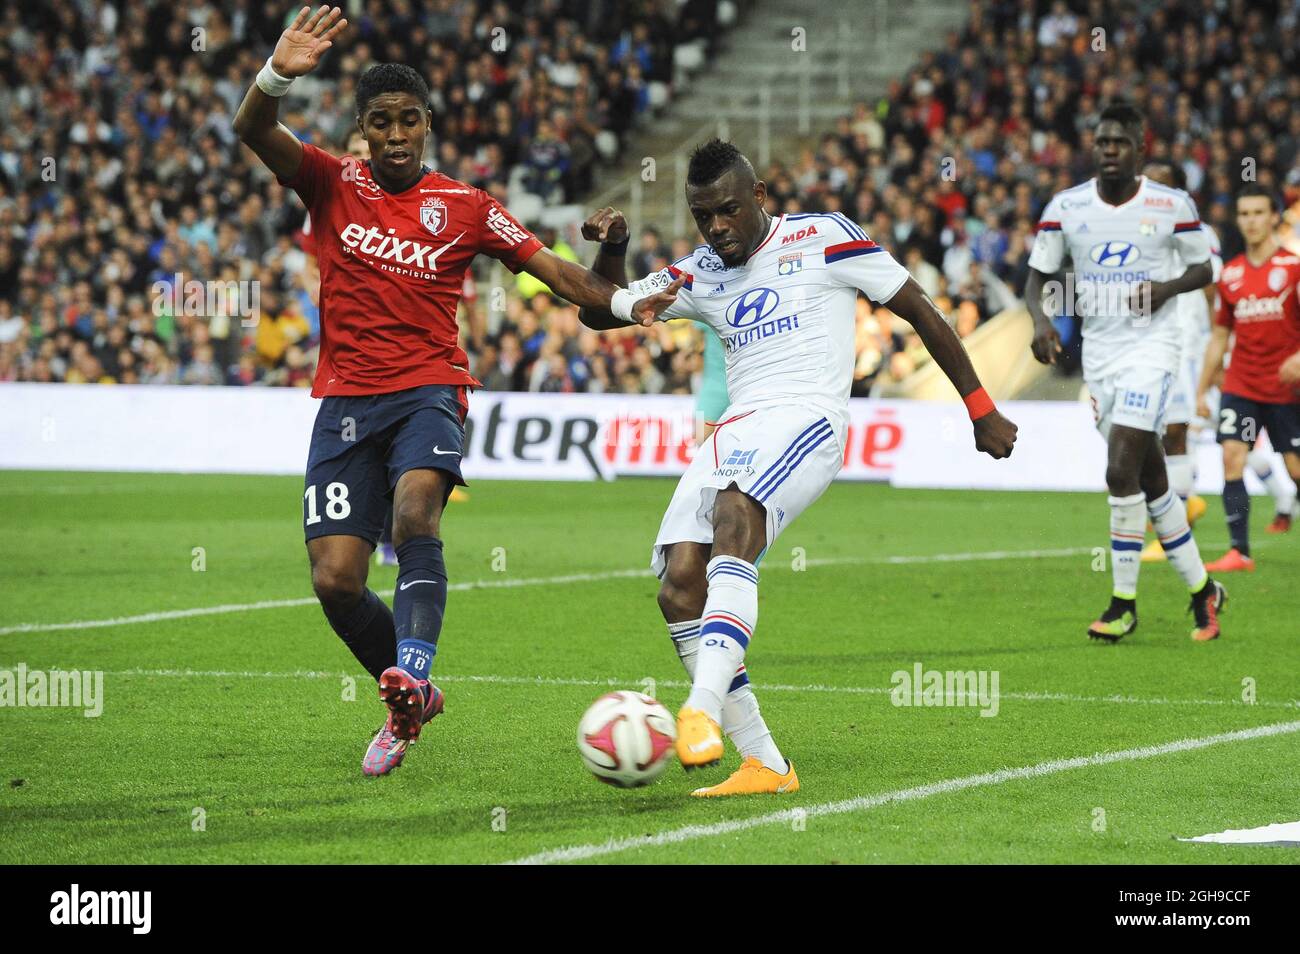 Henri Bedimo during the French Ligue 1 match between Lyon and Lille at the Stade de Gerland in France on October 05, 2014. Stock Photo